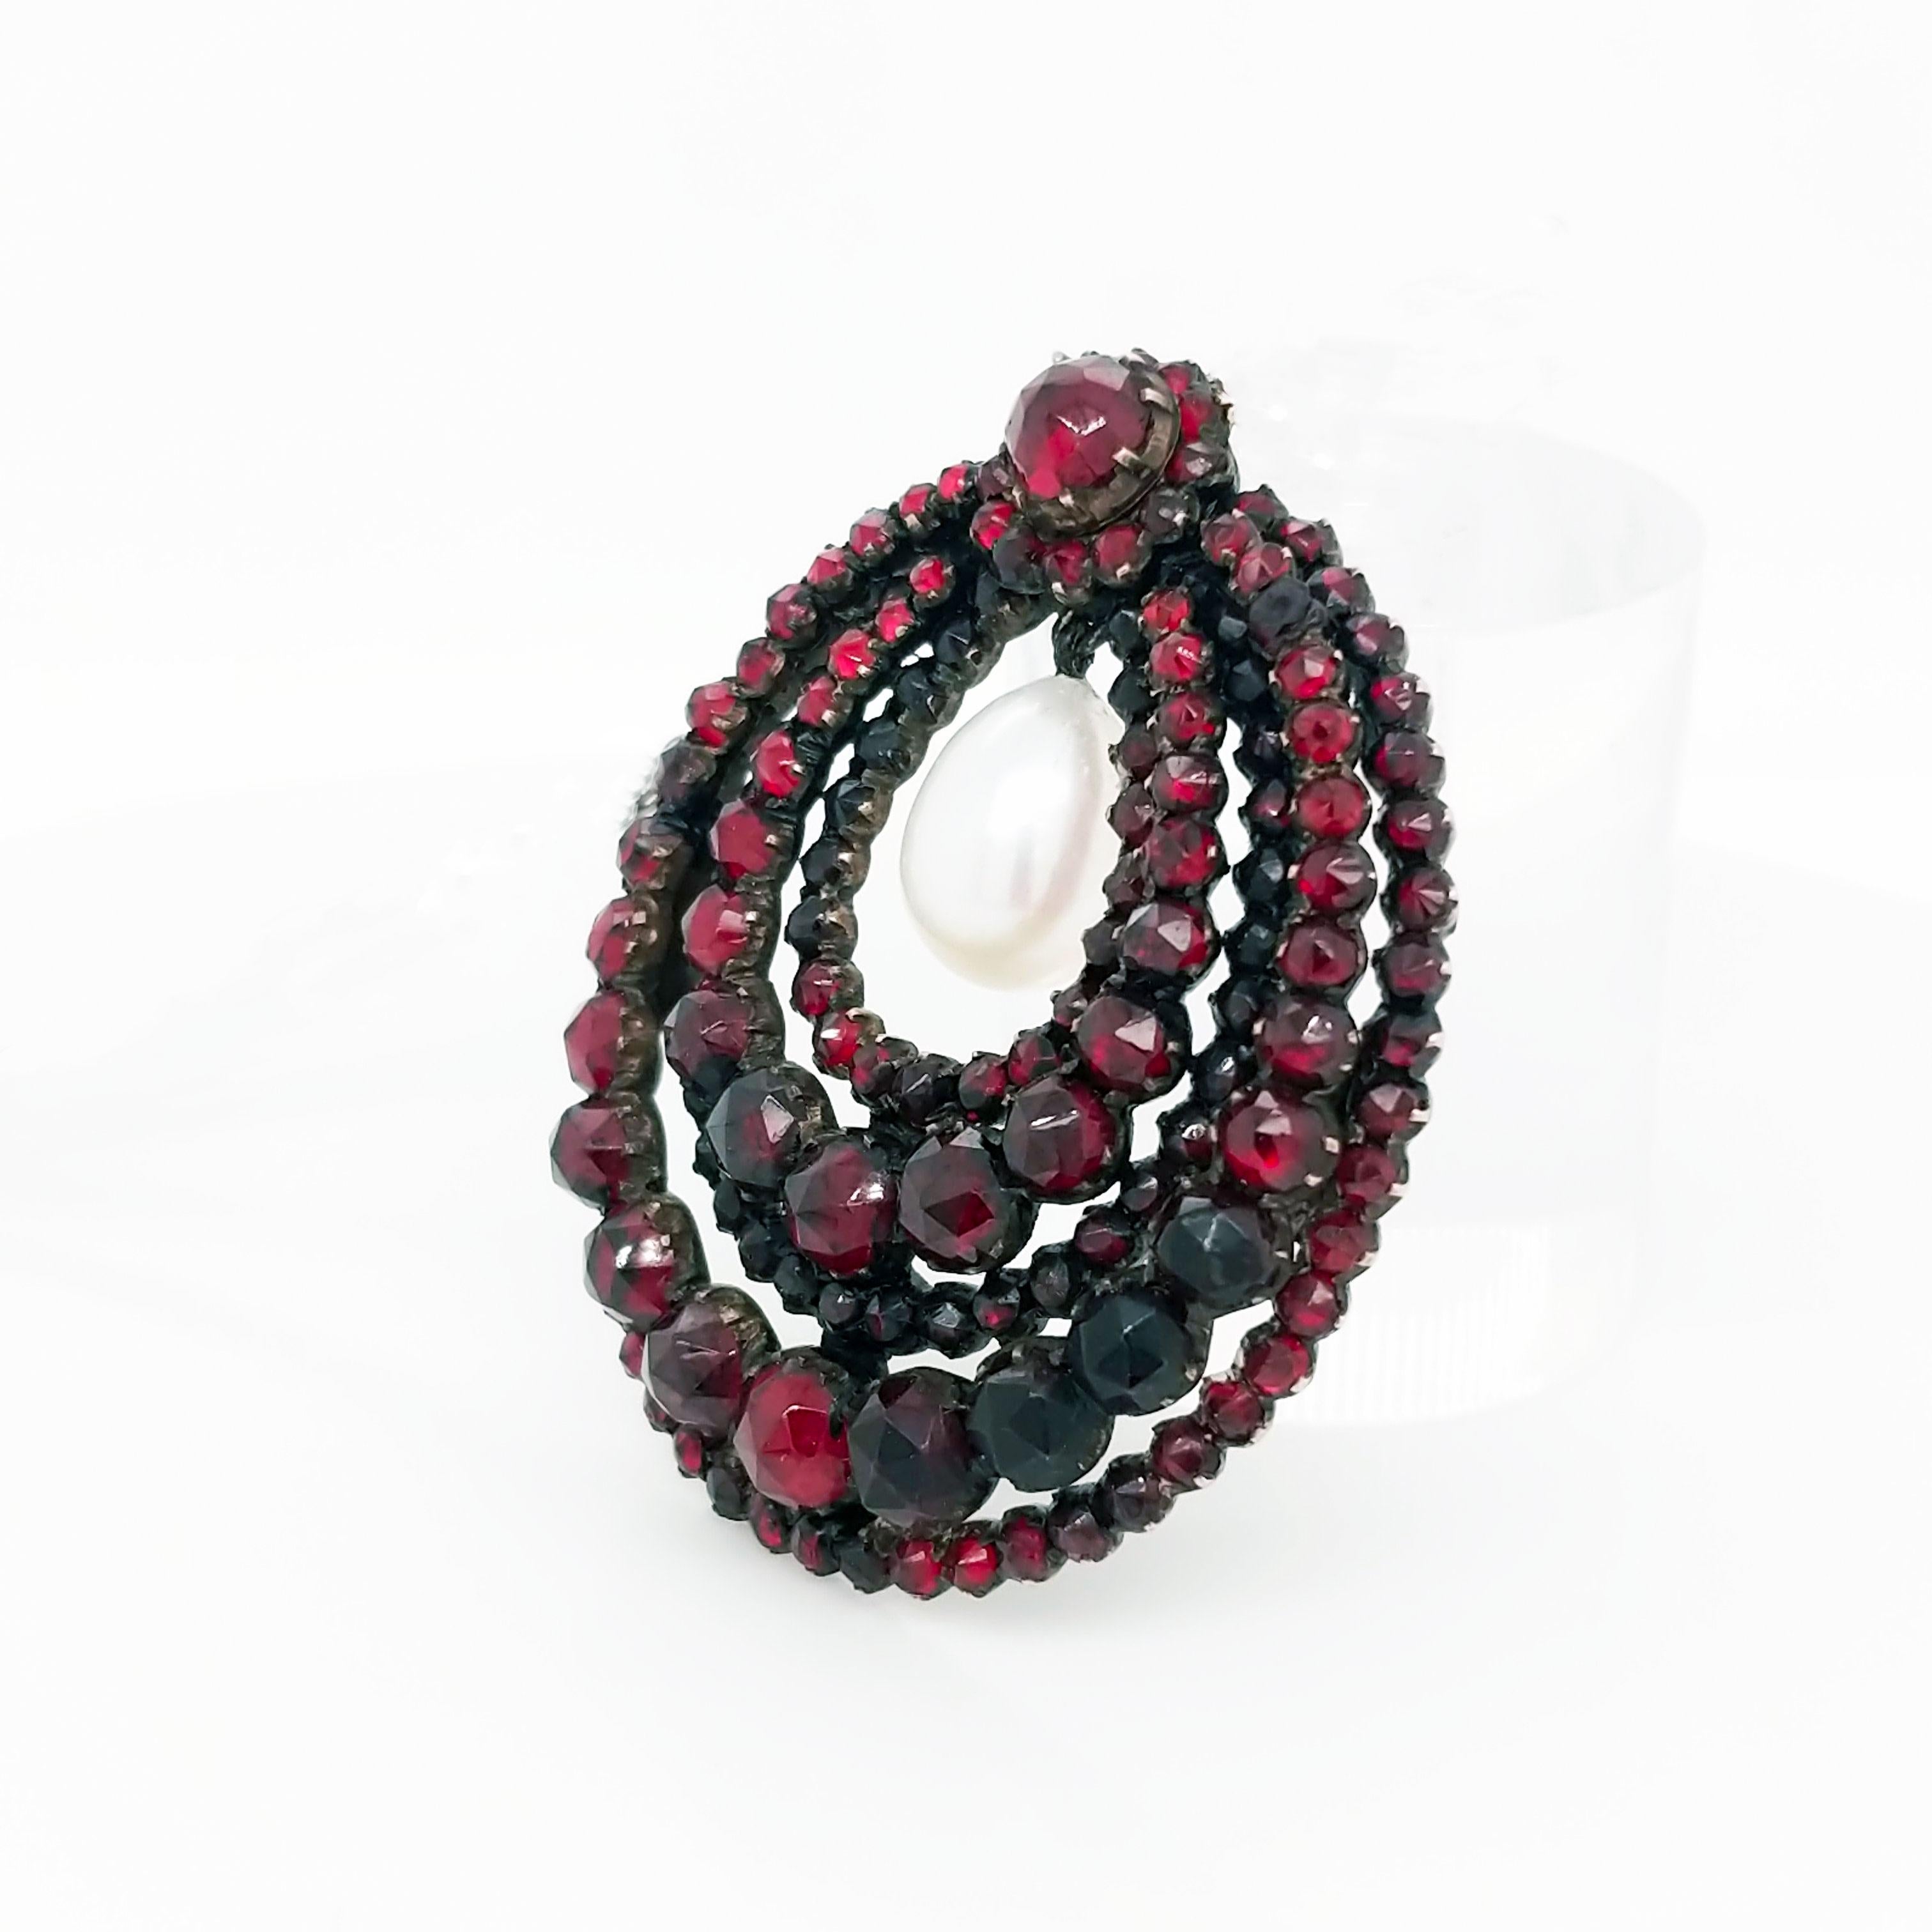 This necklace is just lovely! Made of sterling silver and gorgeous deep red garnets with an articulated cultured pearl in the center, this necklace will surely draw oodles of compliments your way! This beautiful Victorian necklace is on an 18